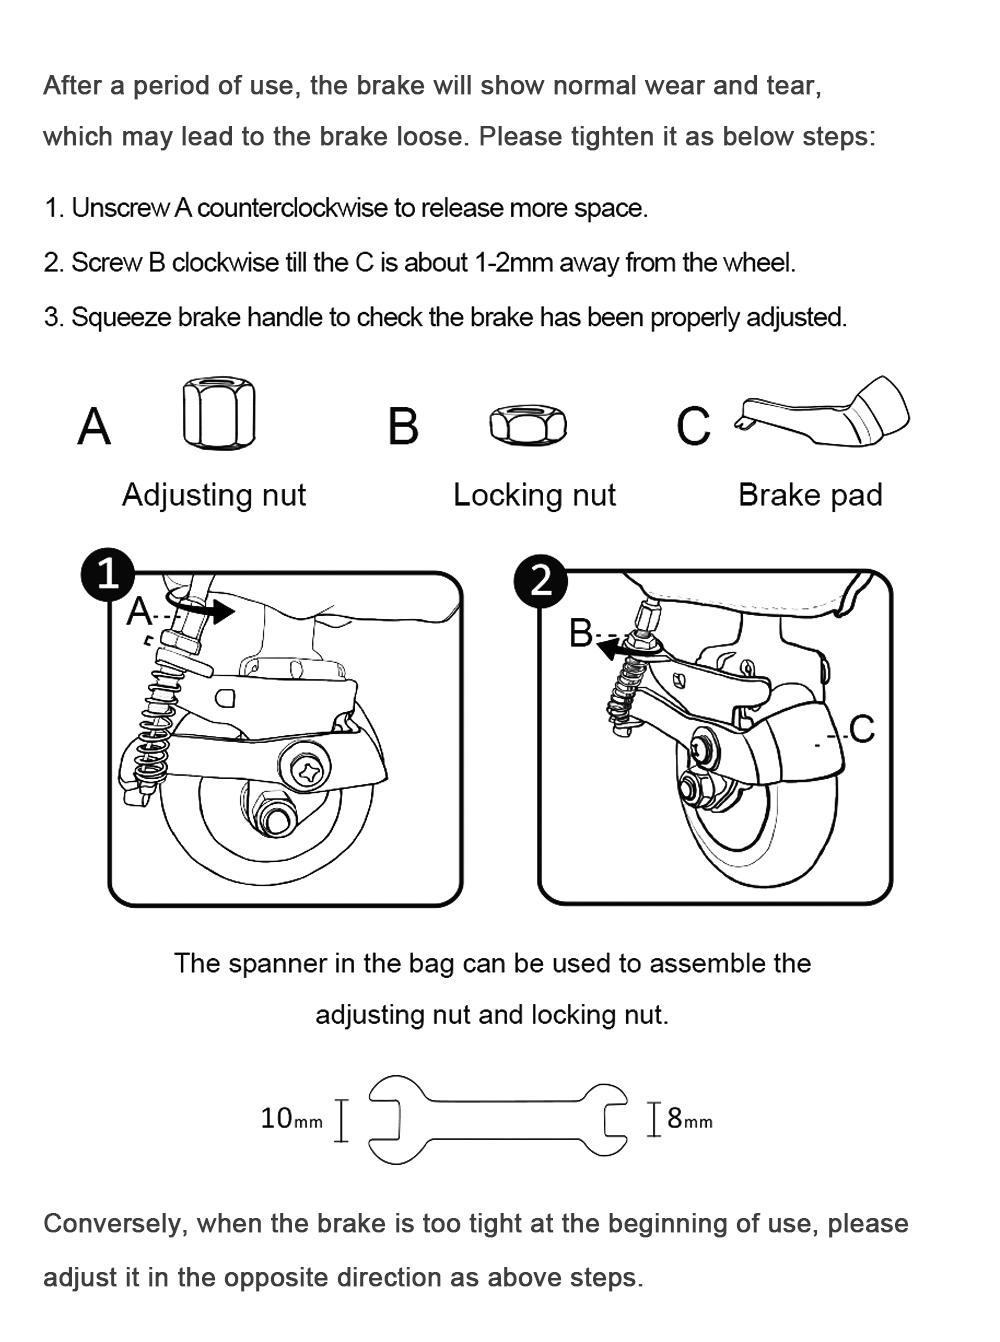 How to adjust the brake?